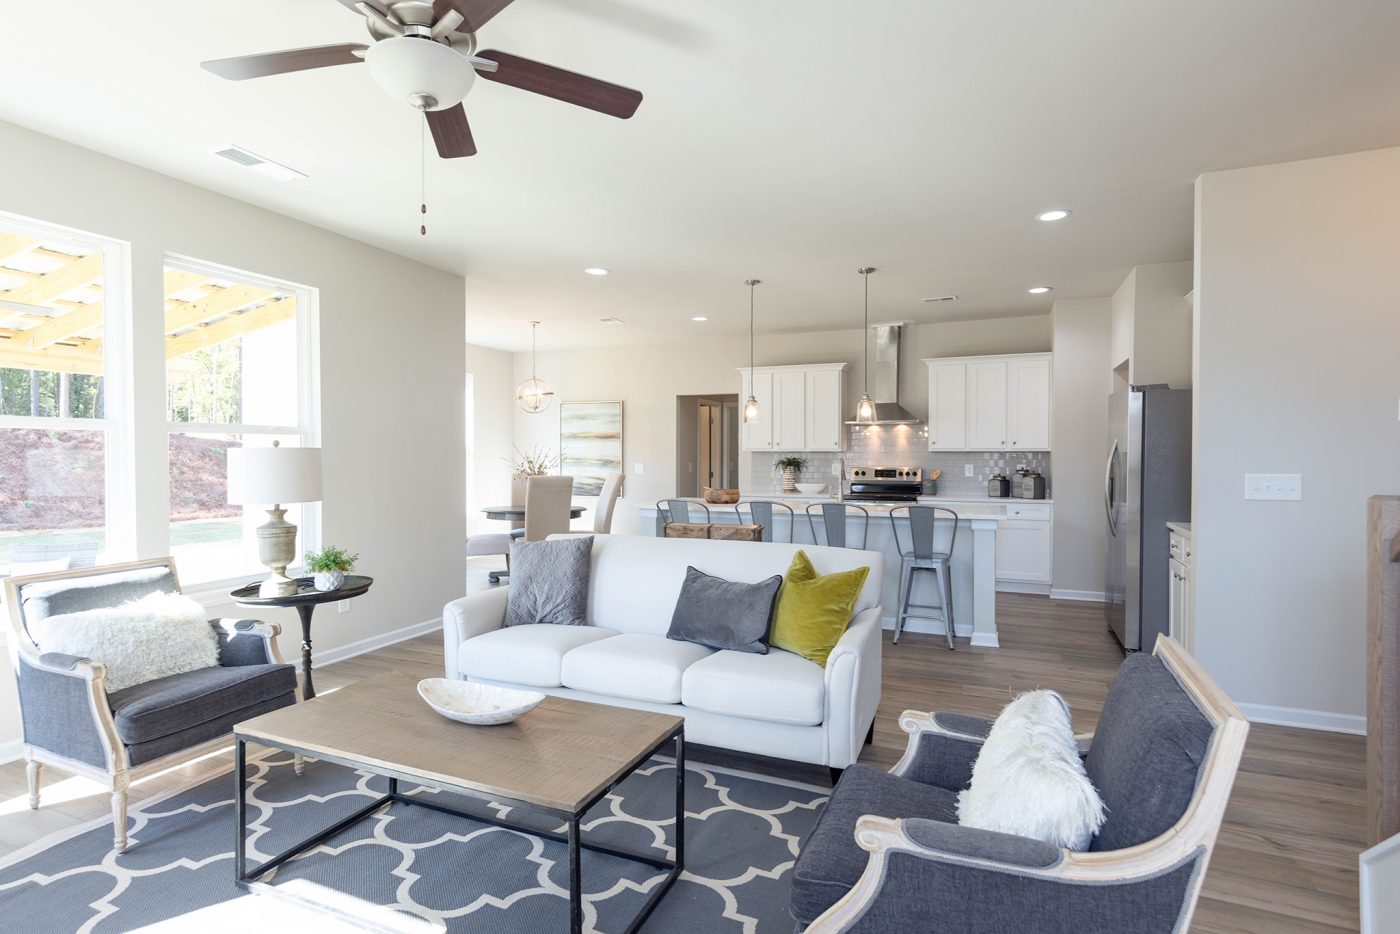 River Station, built by My Home Communities, the community features 29 homesites, with eight floorplans for prospective buyers to choose from.